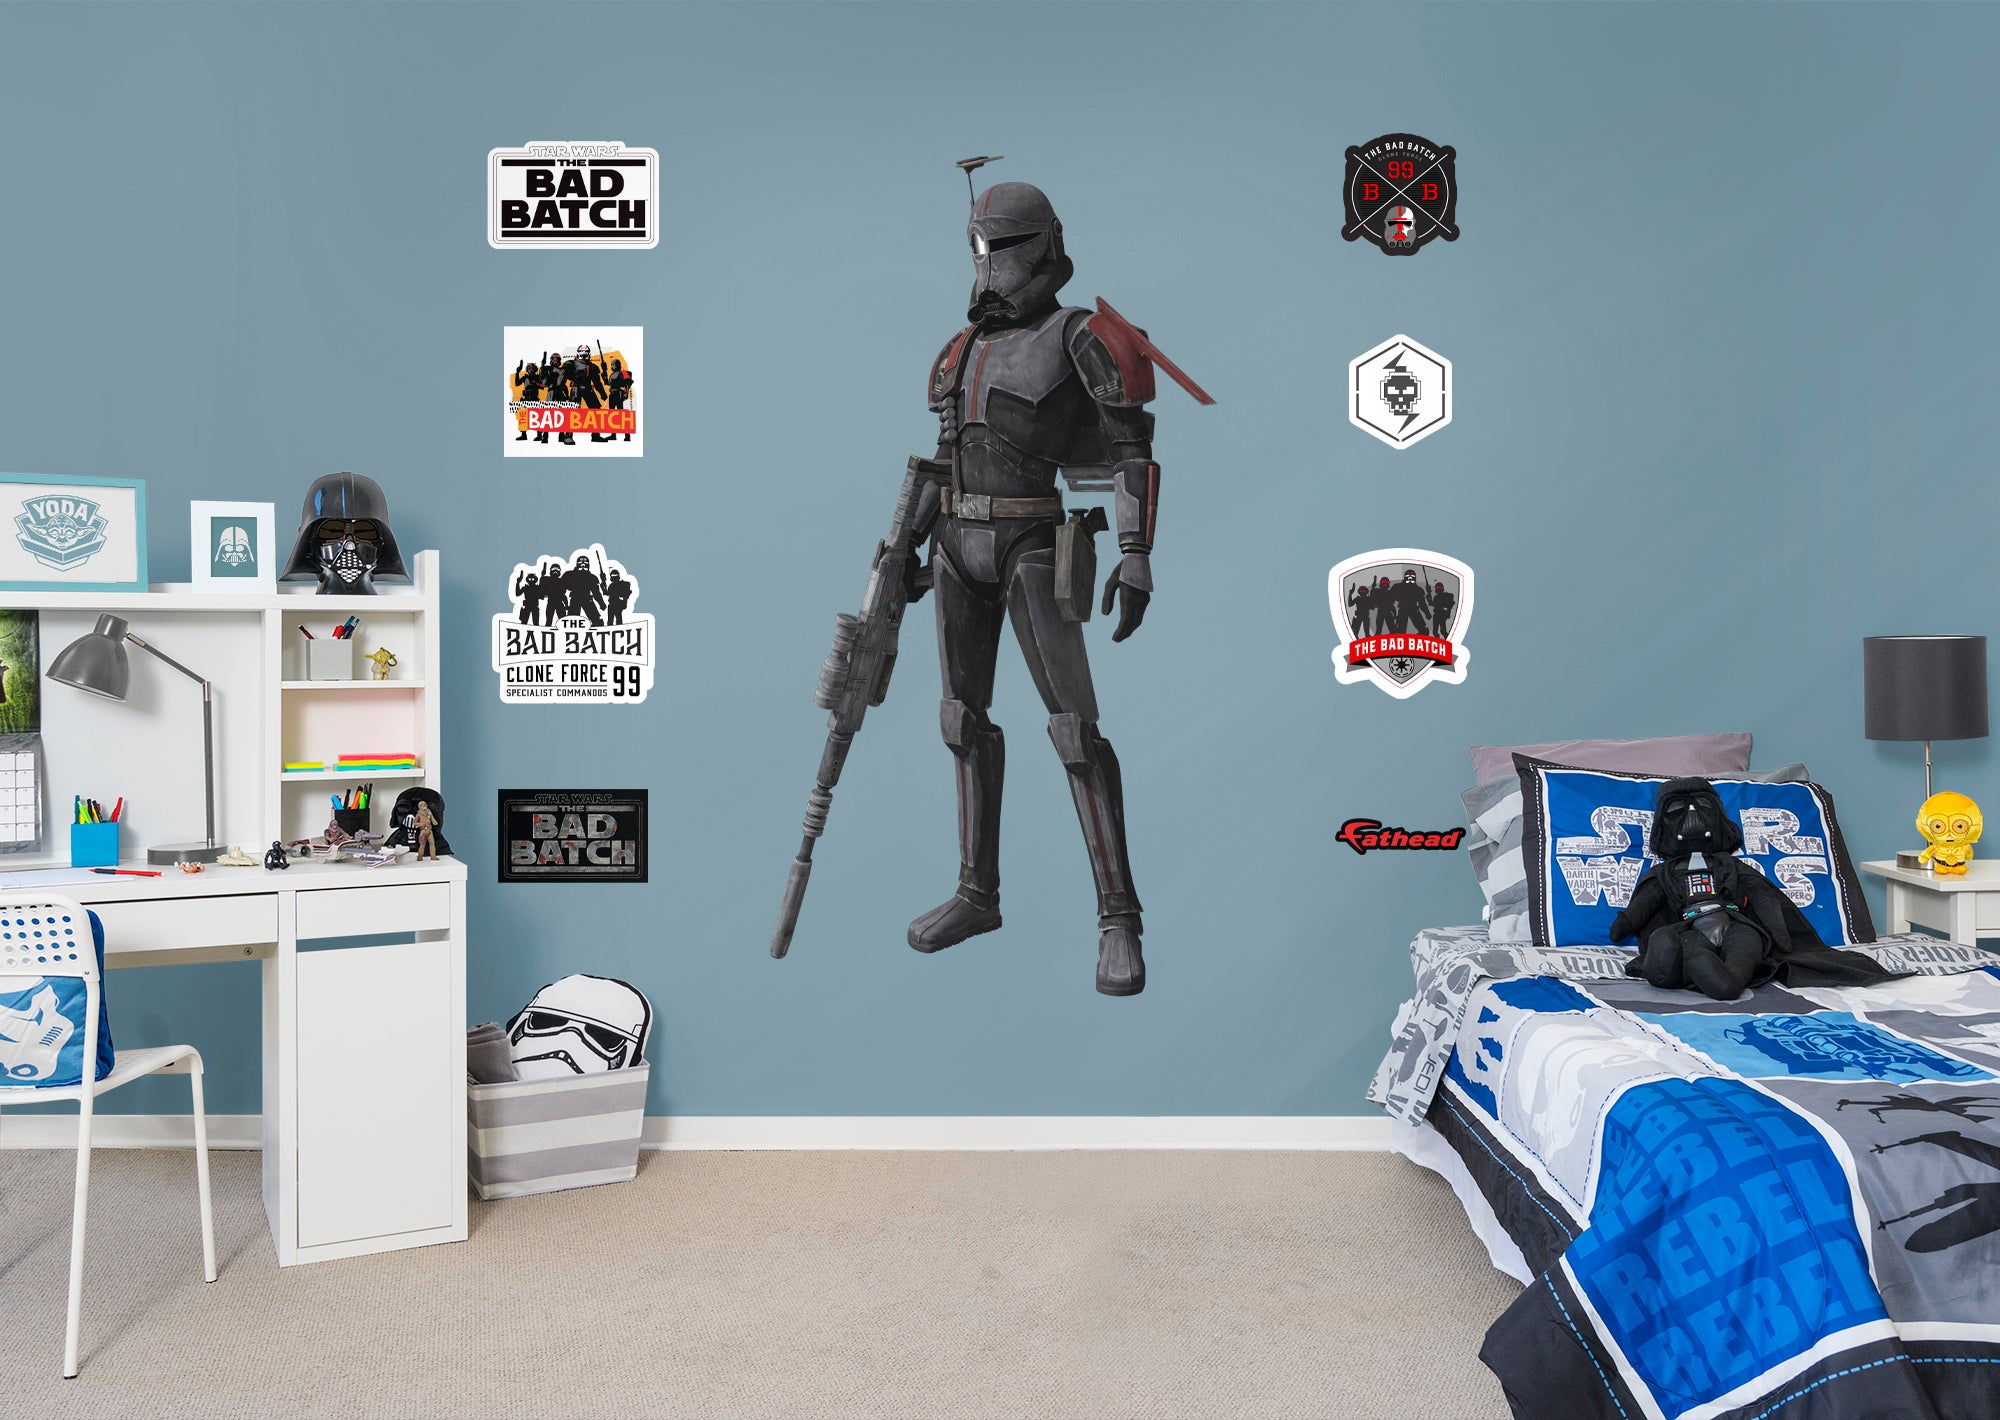 Bad Batch Crosshair - Officially Licensed Star Wars Removable Wall Decal XL by Fathead | Vinyl